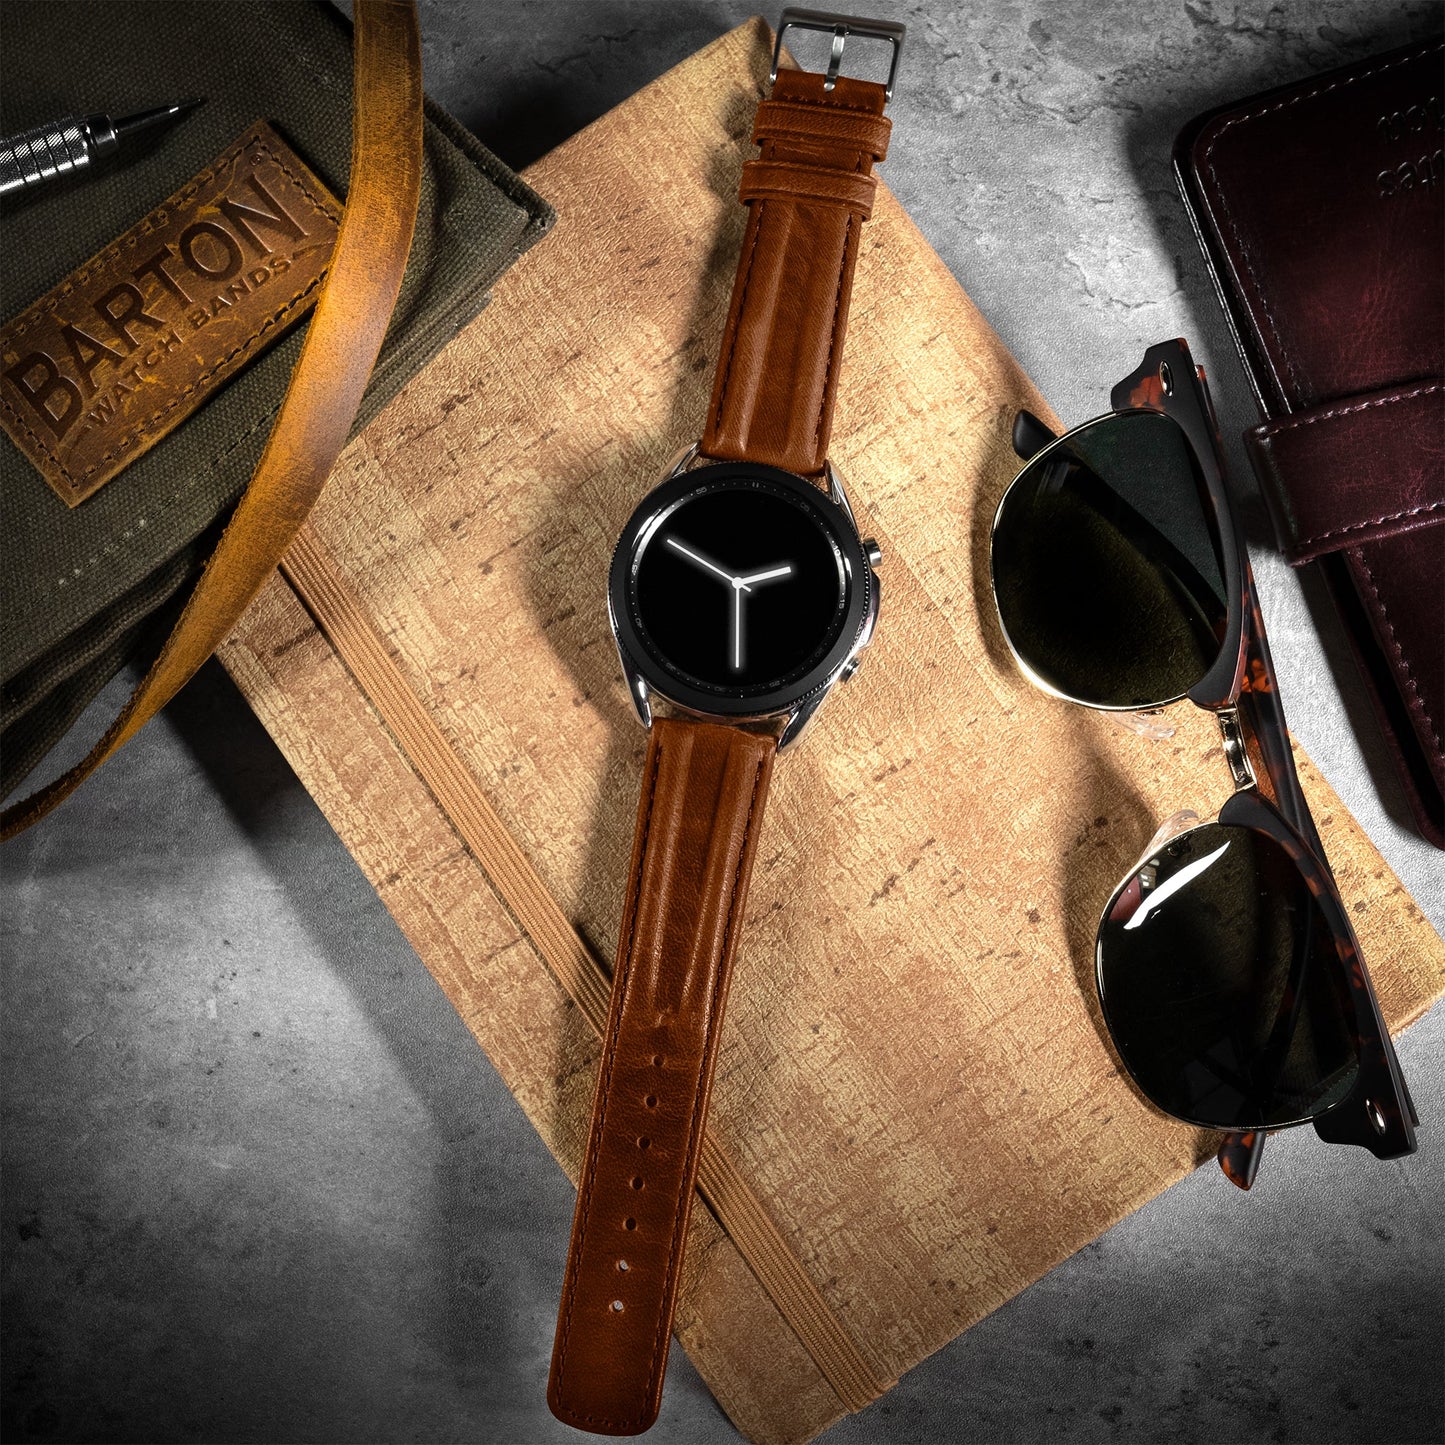 Samsung Galaxy Watch Active | Classic Horween Leather | Chocolate Brown - Barton Watch Bands